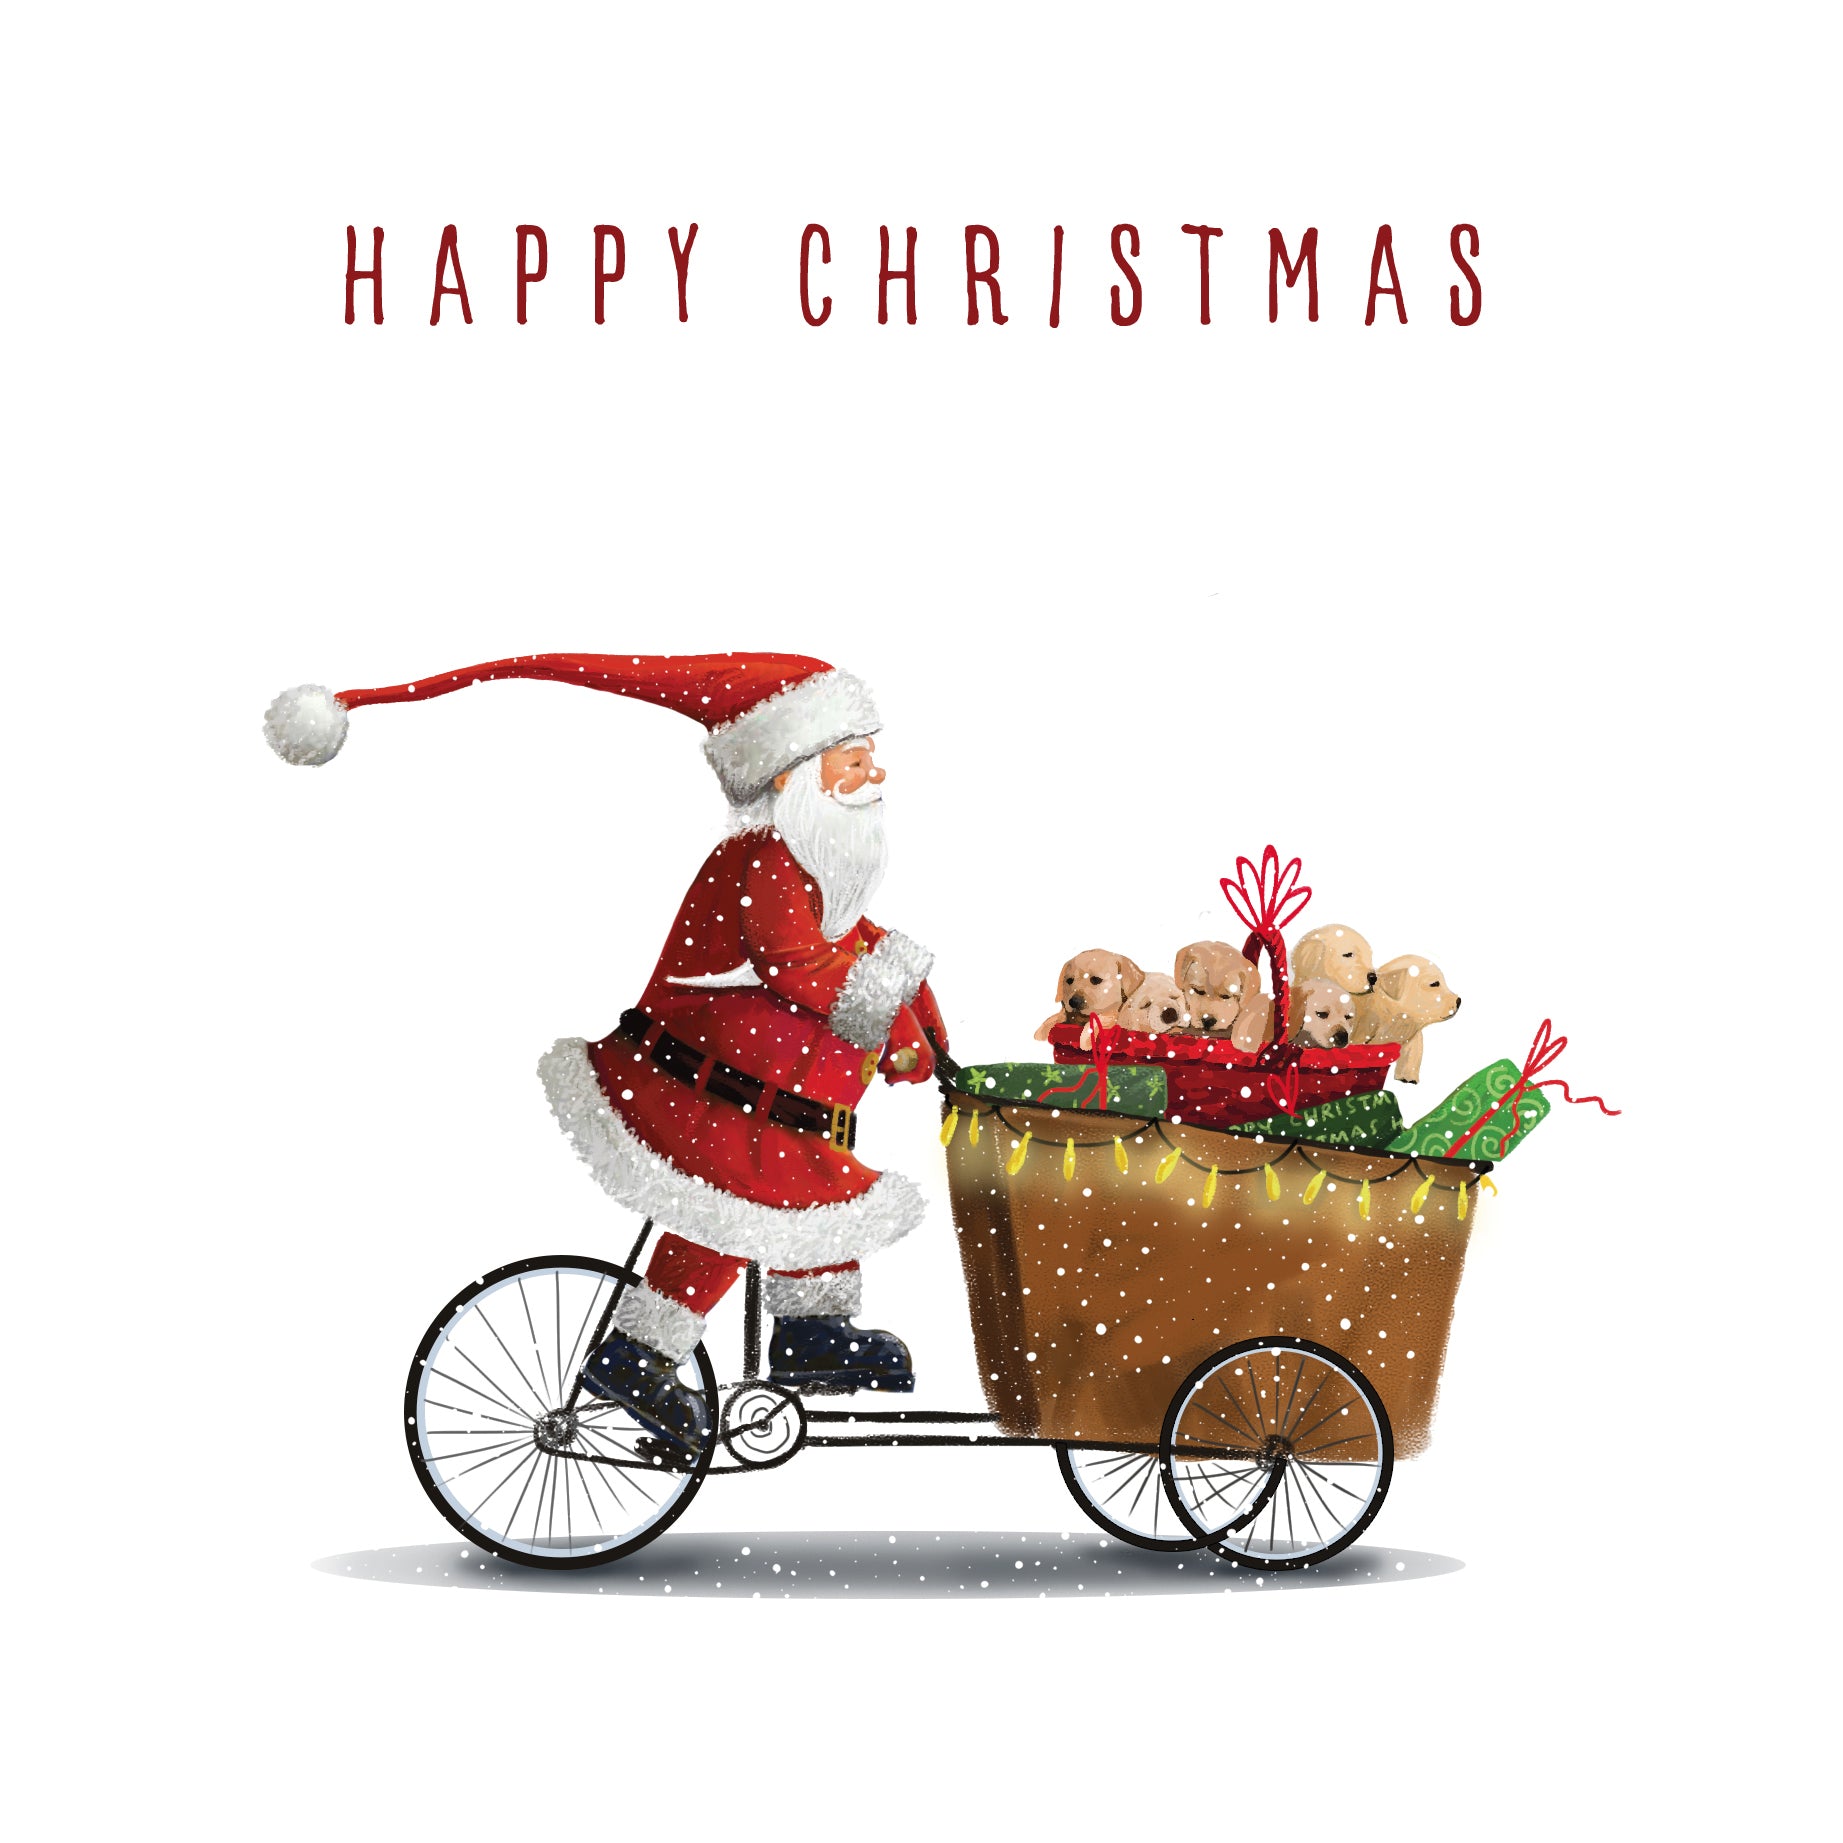 The design is a cartoon of Santa riding a bicycle pushing a cart filled with presents and puppies. The card reads "Happy Christmas."